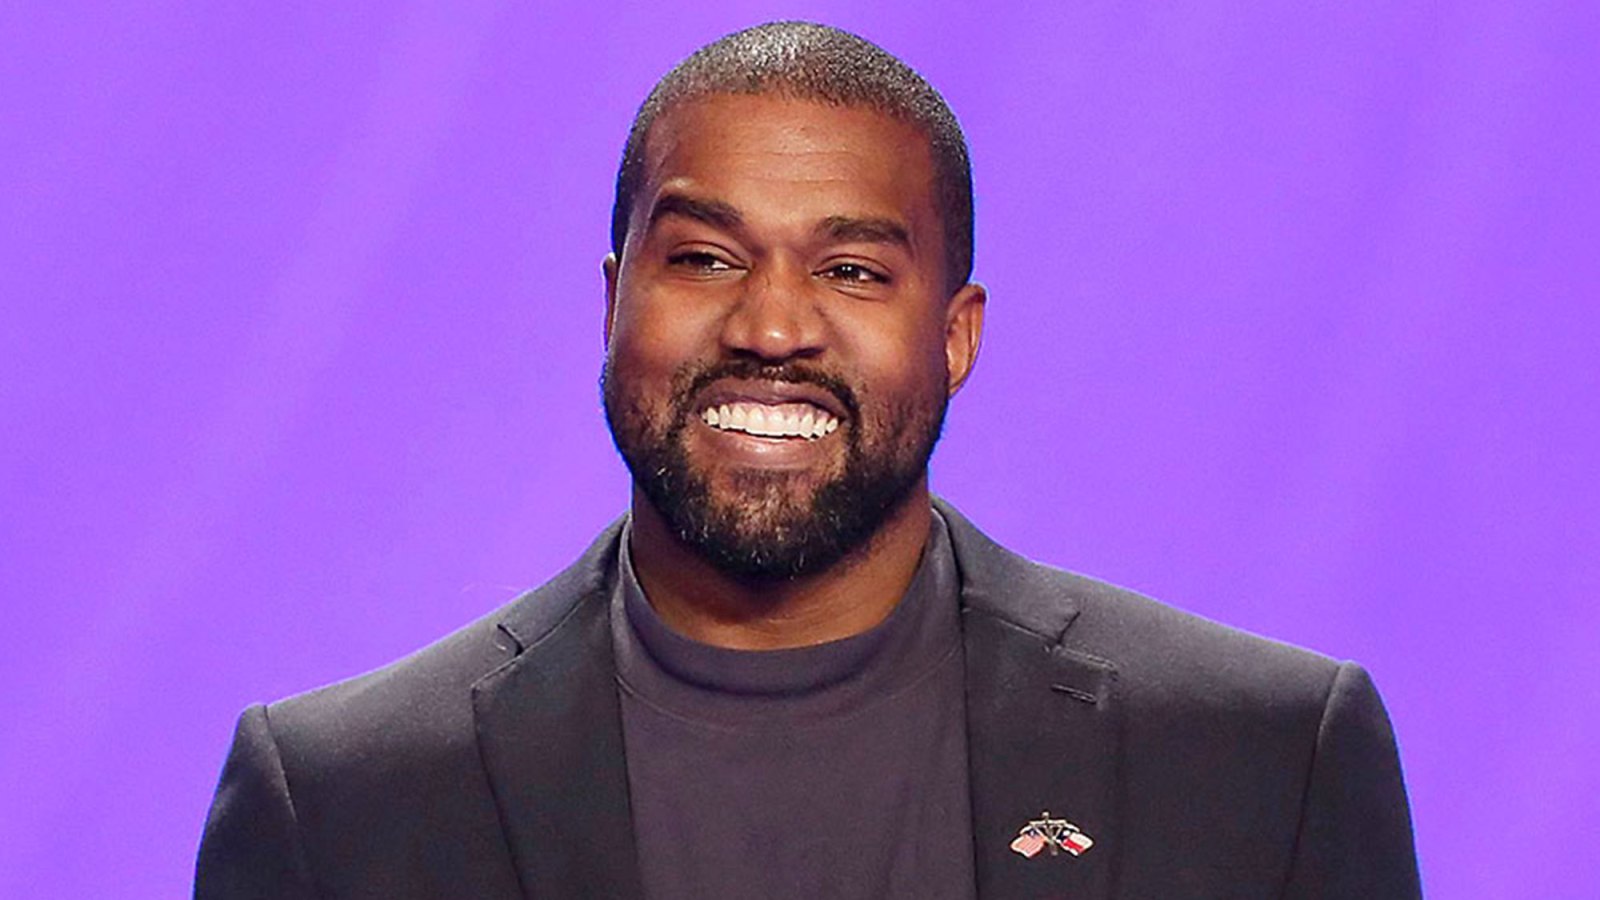 Kanye West Files Petition With L.A. Court to Legally Change Name to Ye